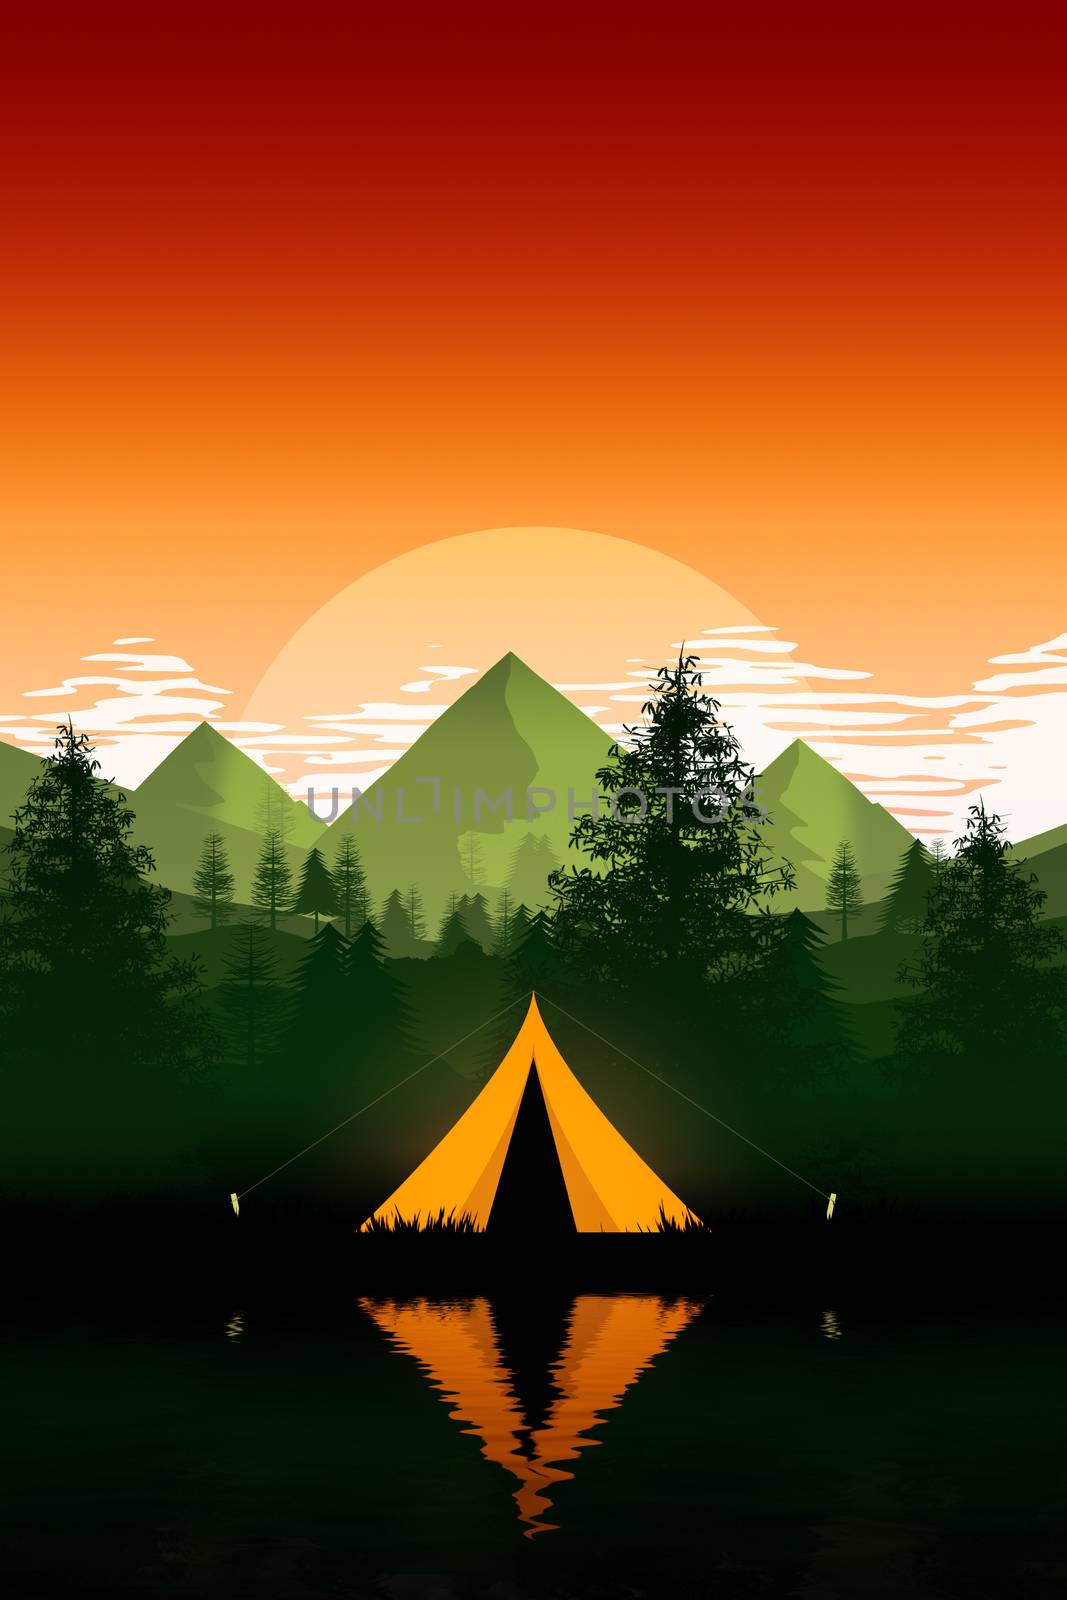 An illustration of a camping tent in the evening mountains nature